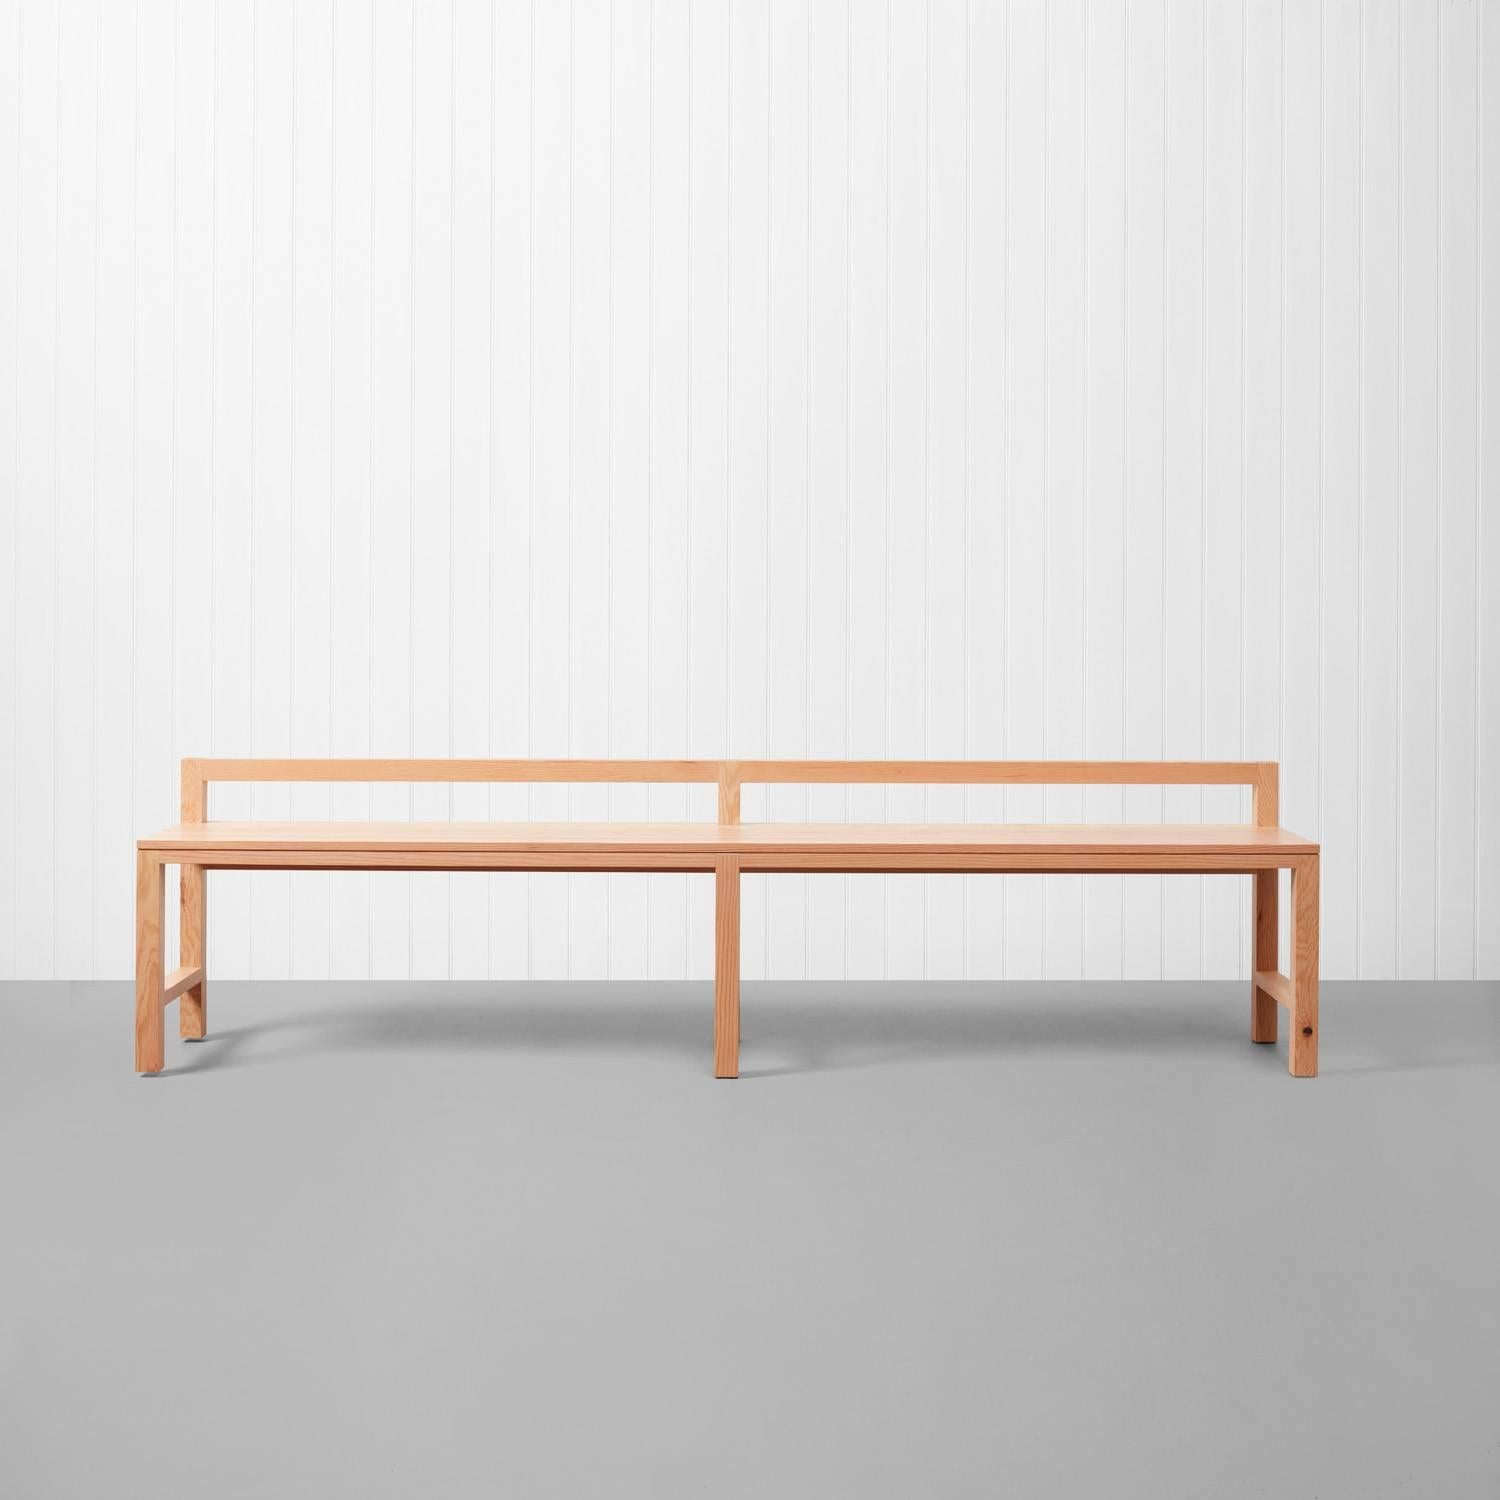 Stumpy is a low-backed bench with clean, architectural lines and square legs and low backrest.

It is available in four sizes from 1.5m up to 2.4m and offers an impressive sense of perspective at full length. As with PLANK, STUMPY is available
in